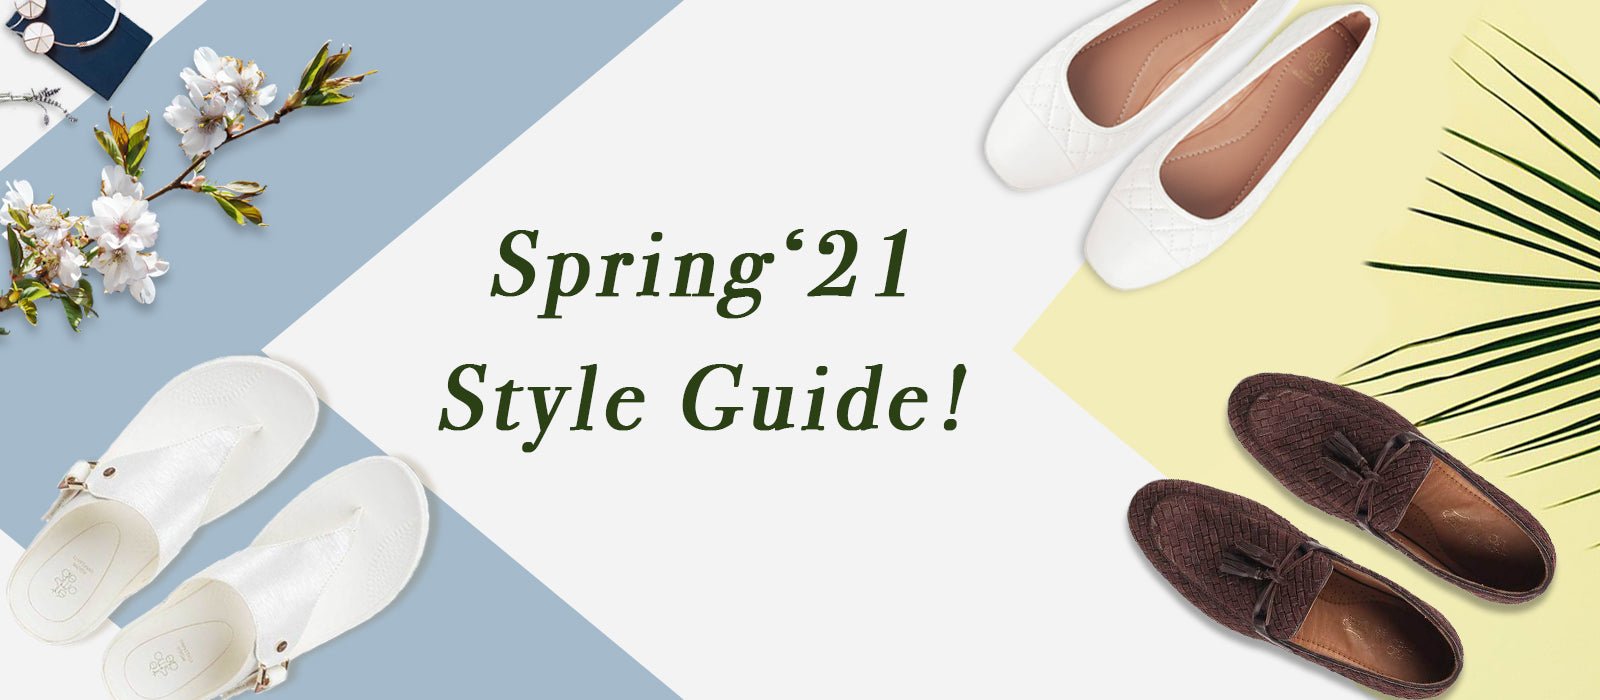 Spring footwear styles you can't do without! - Tresmode